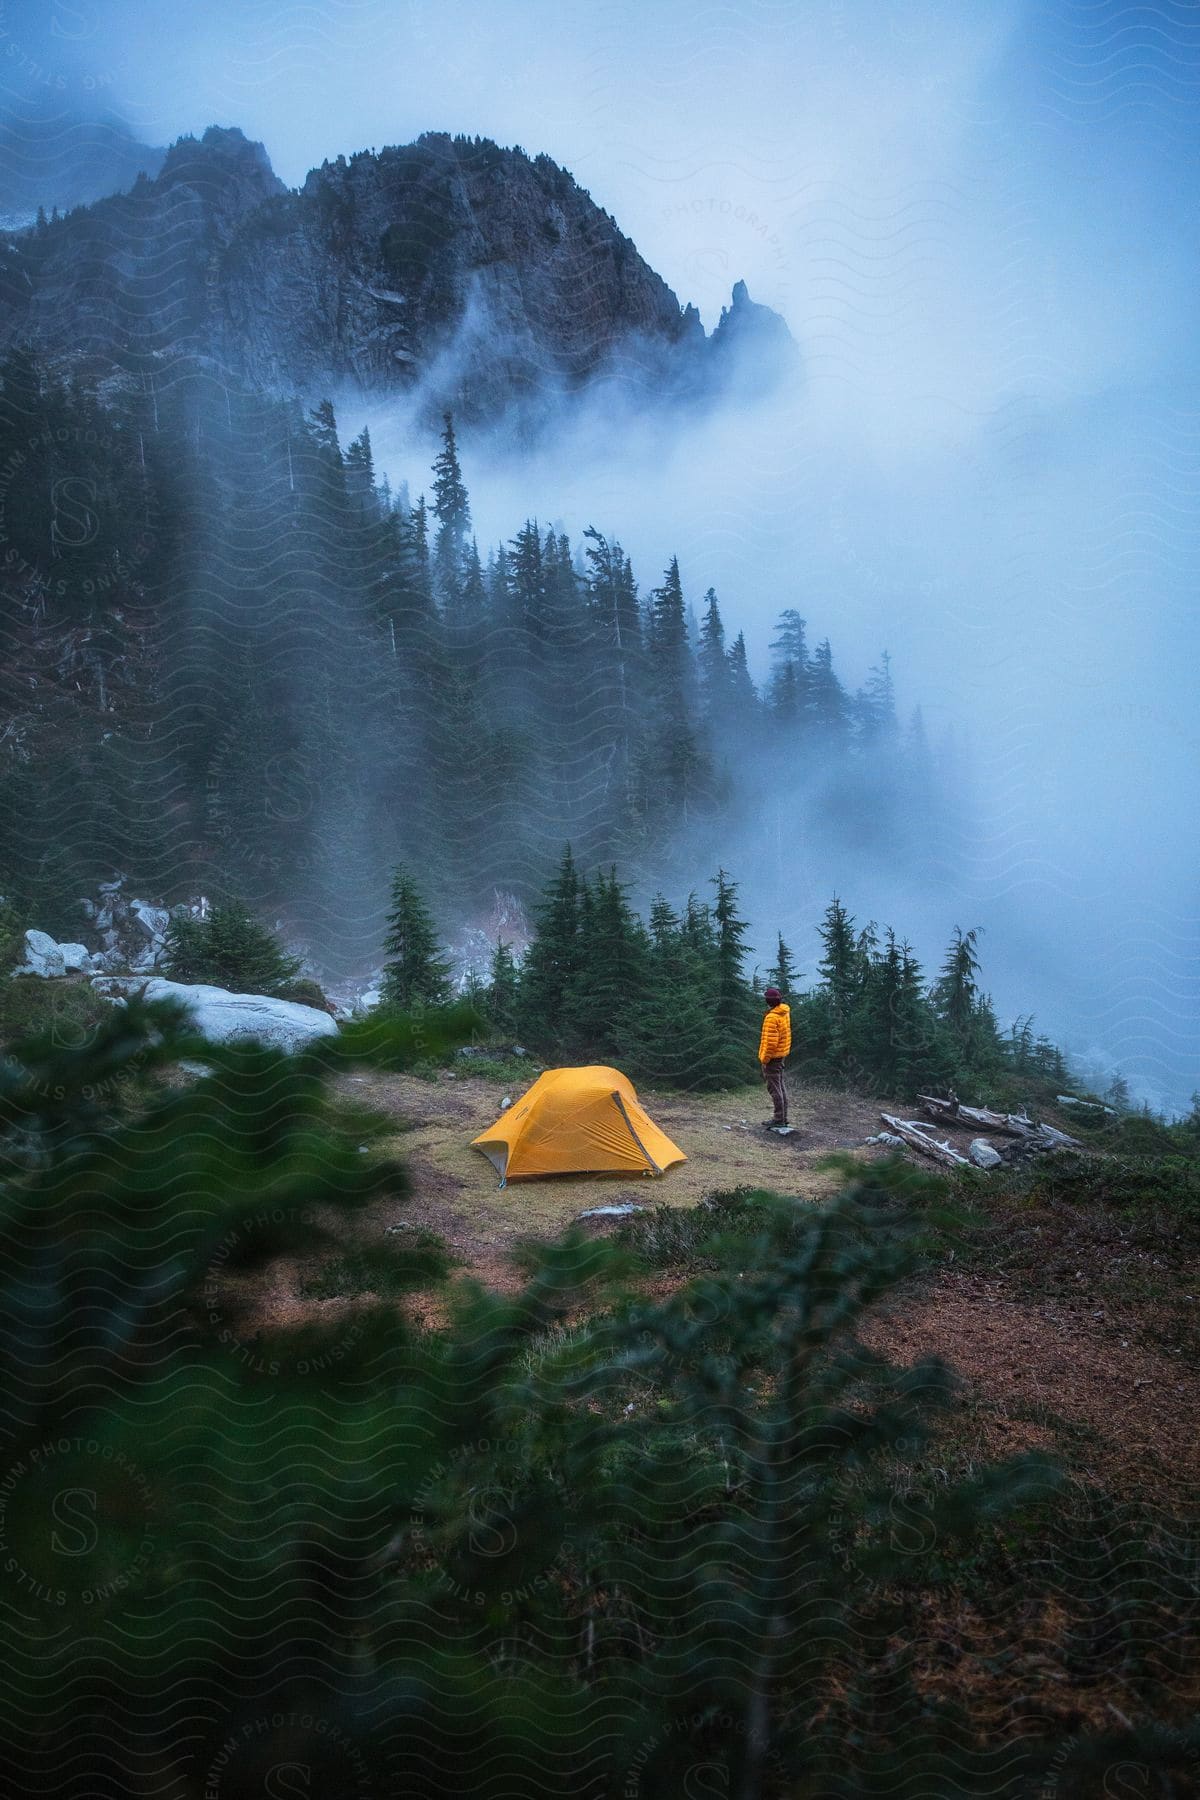 An adult camper stands next to a yellow tent on a mountain in an evergreen forest.